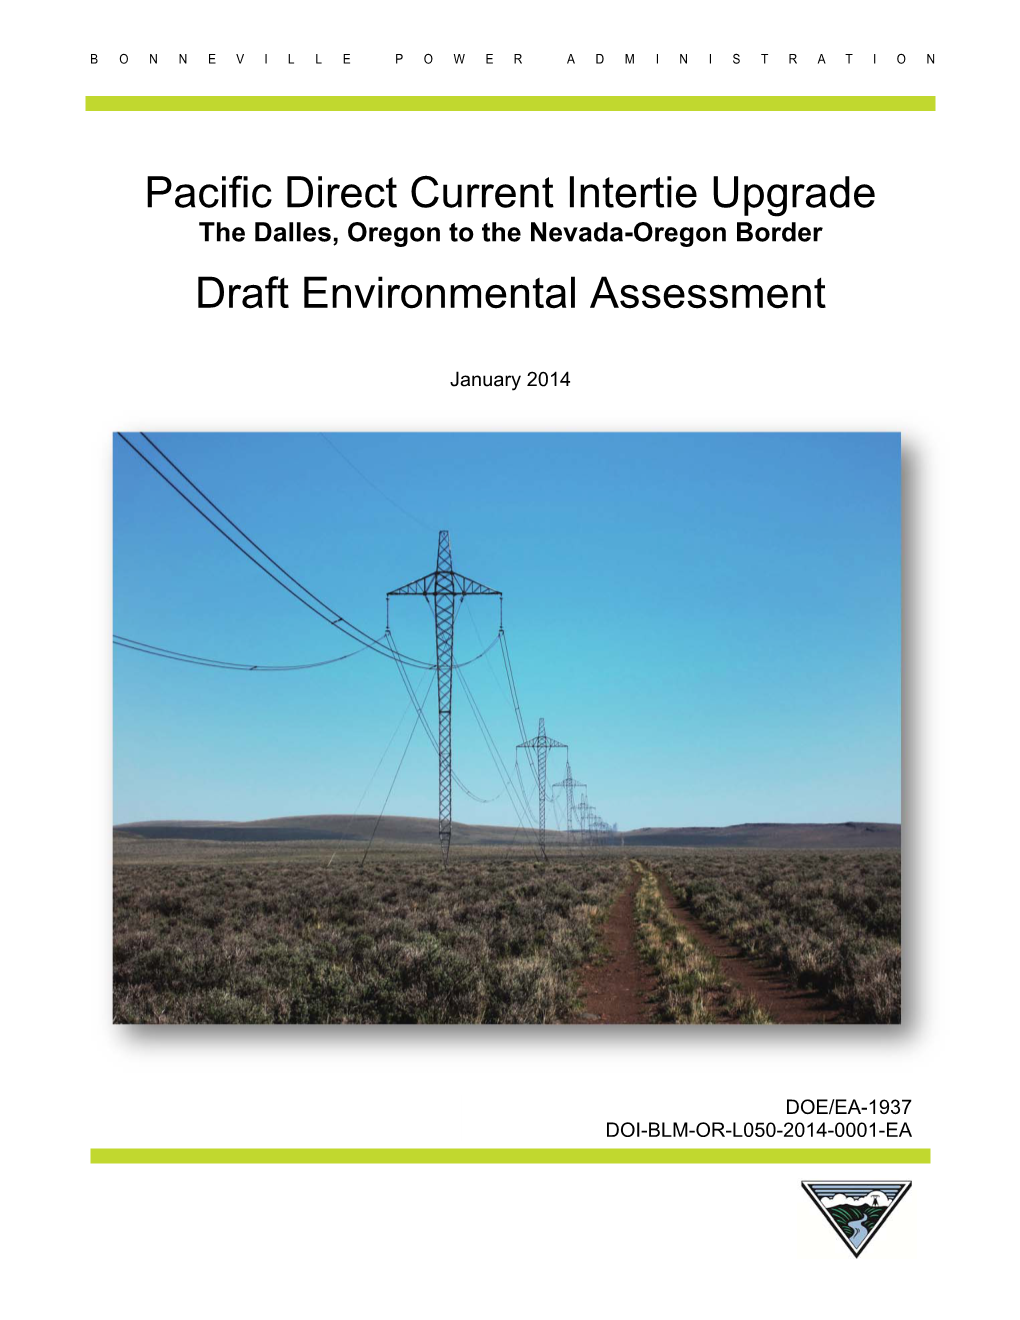 Pacific Direct Current Intertie Upgrade Draft Environmental Assessment